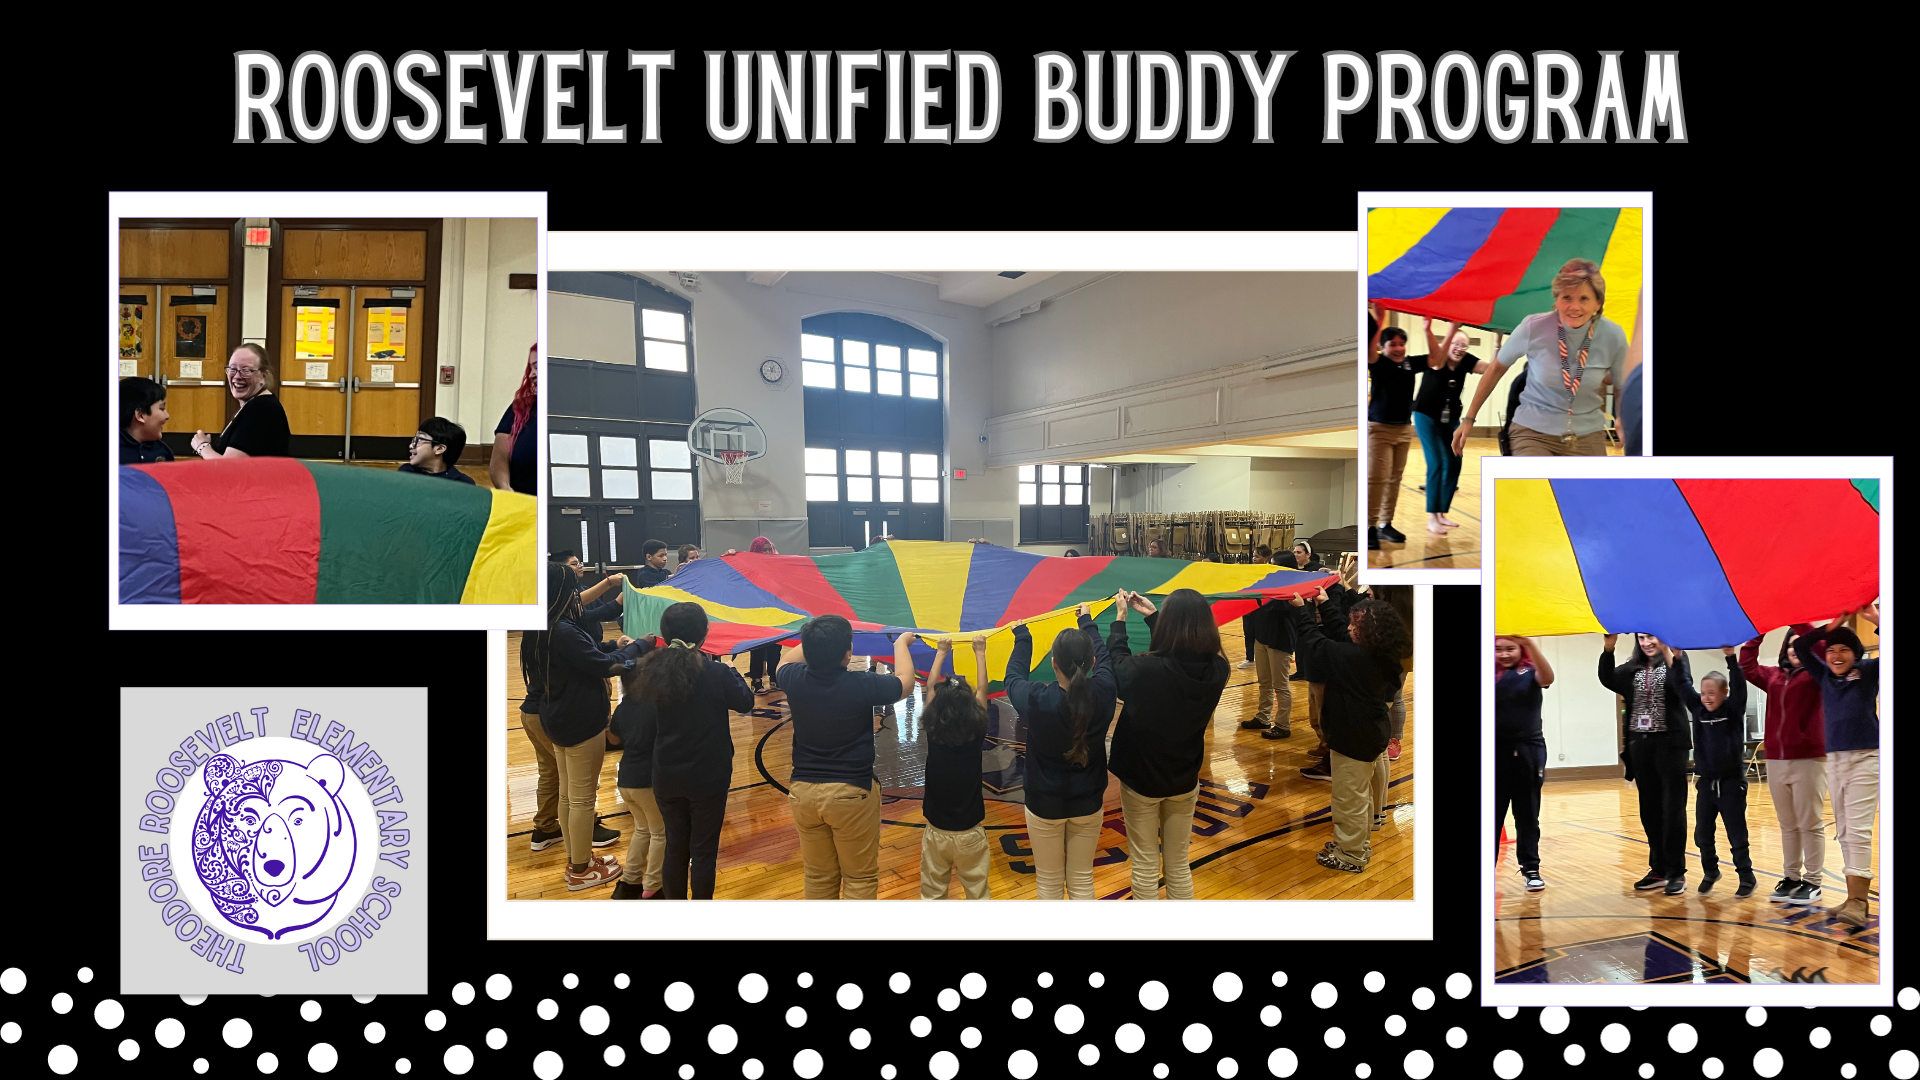 Unified Buddy Program at the Roosevelt School